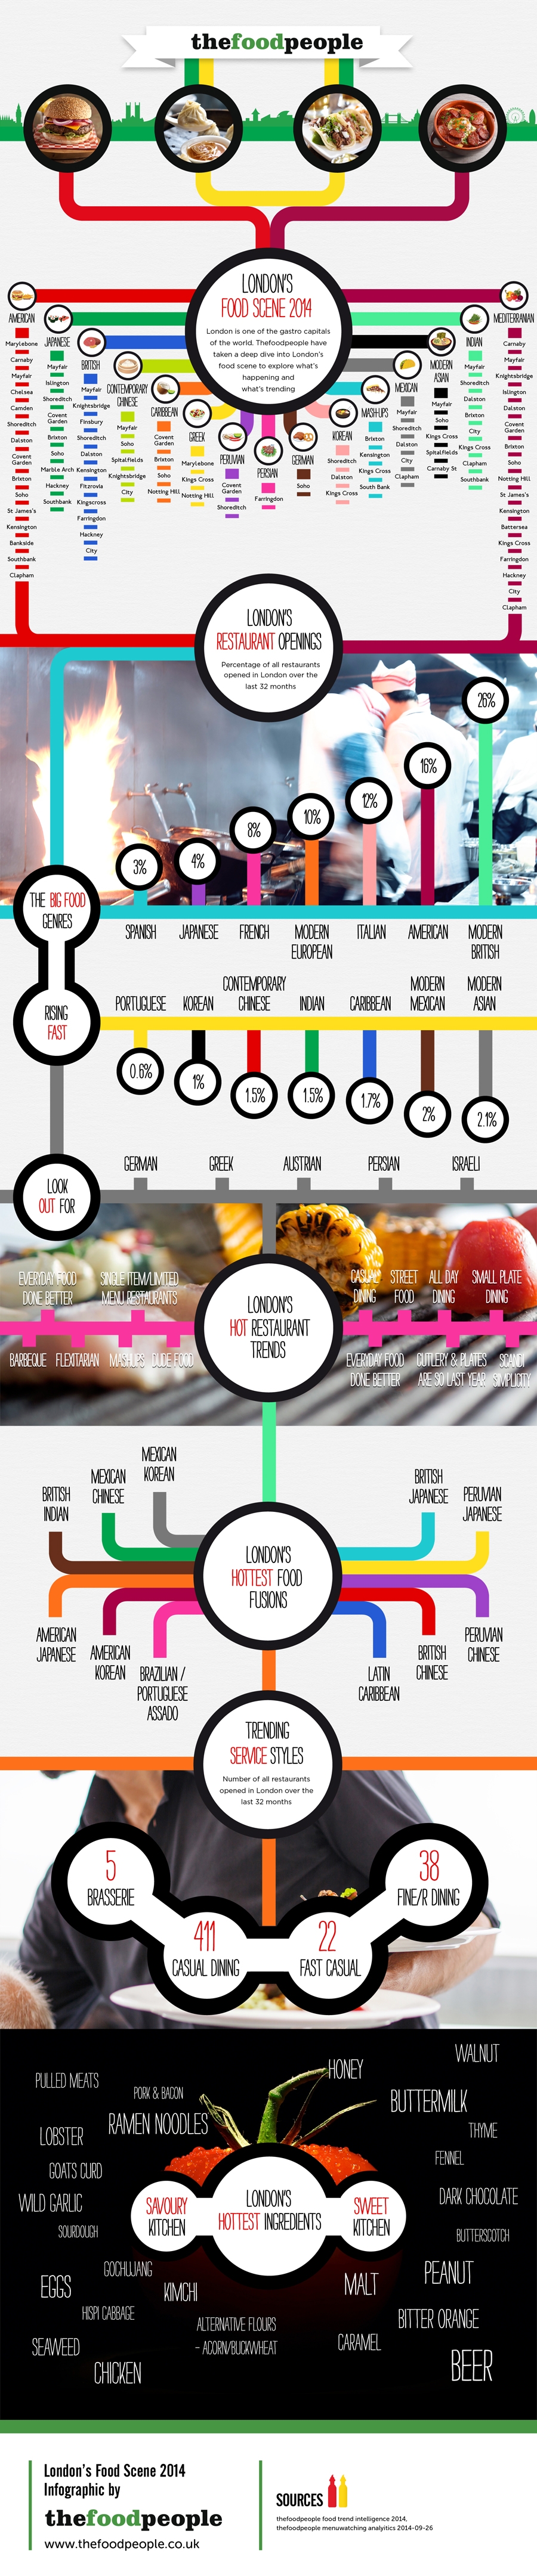 London food trends infographic